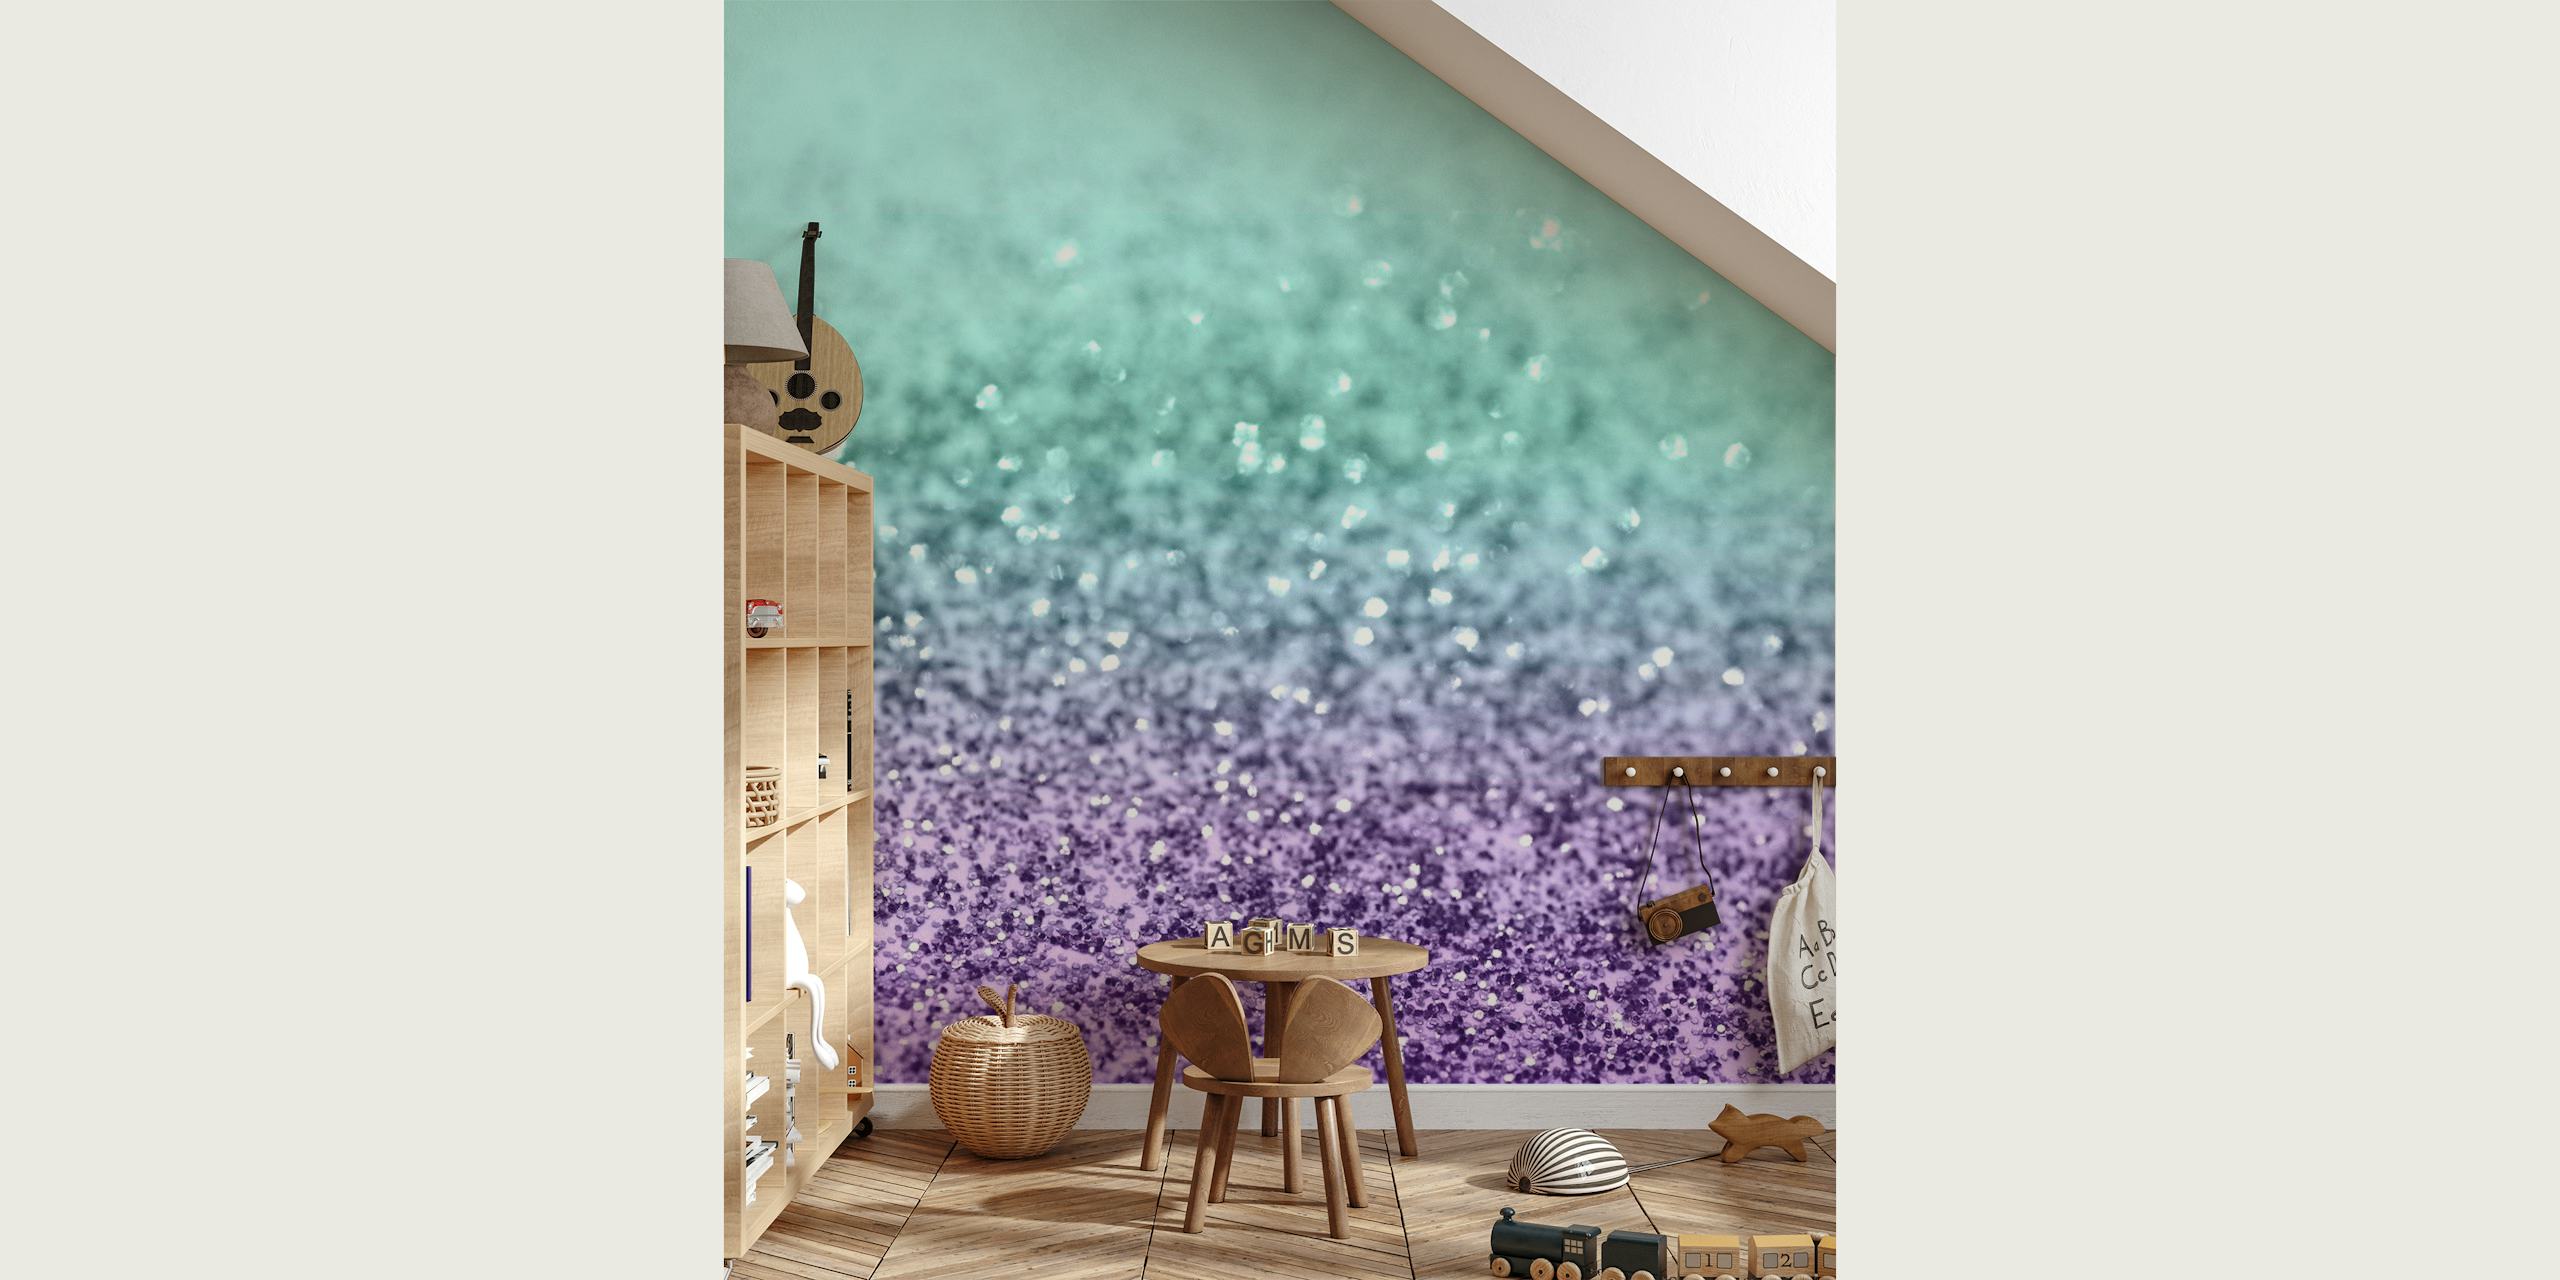 Mermaid Girls Glitter 8a wall mural with a glittery gradient from purple to blue